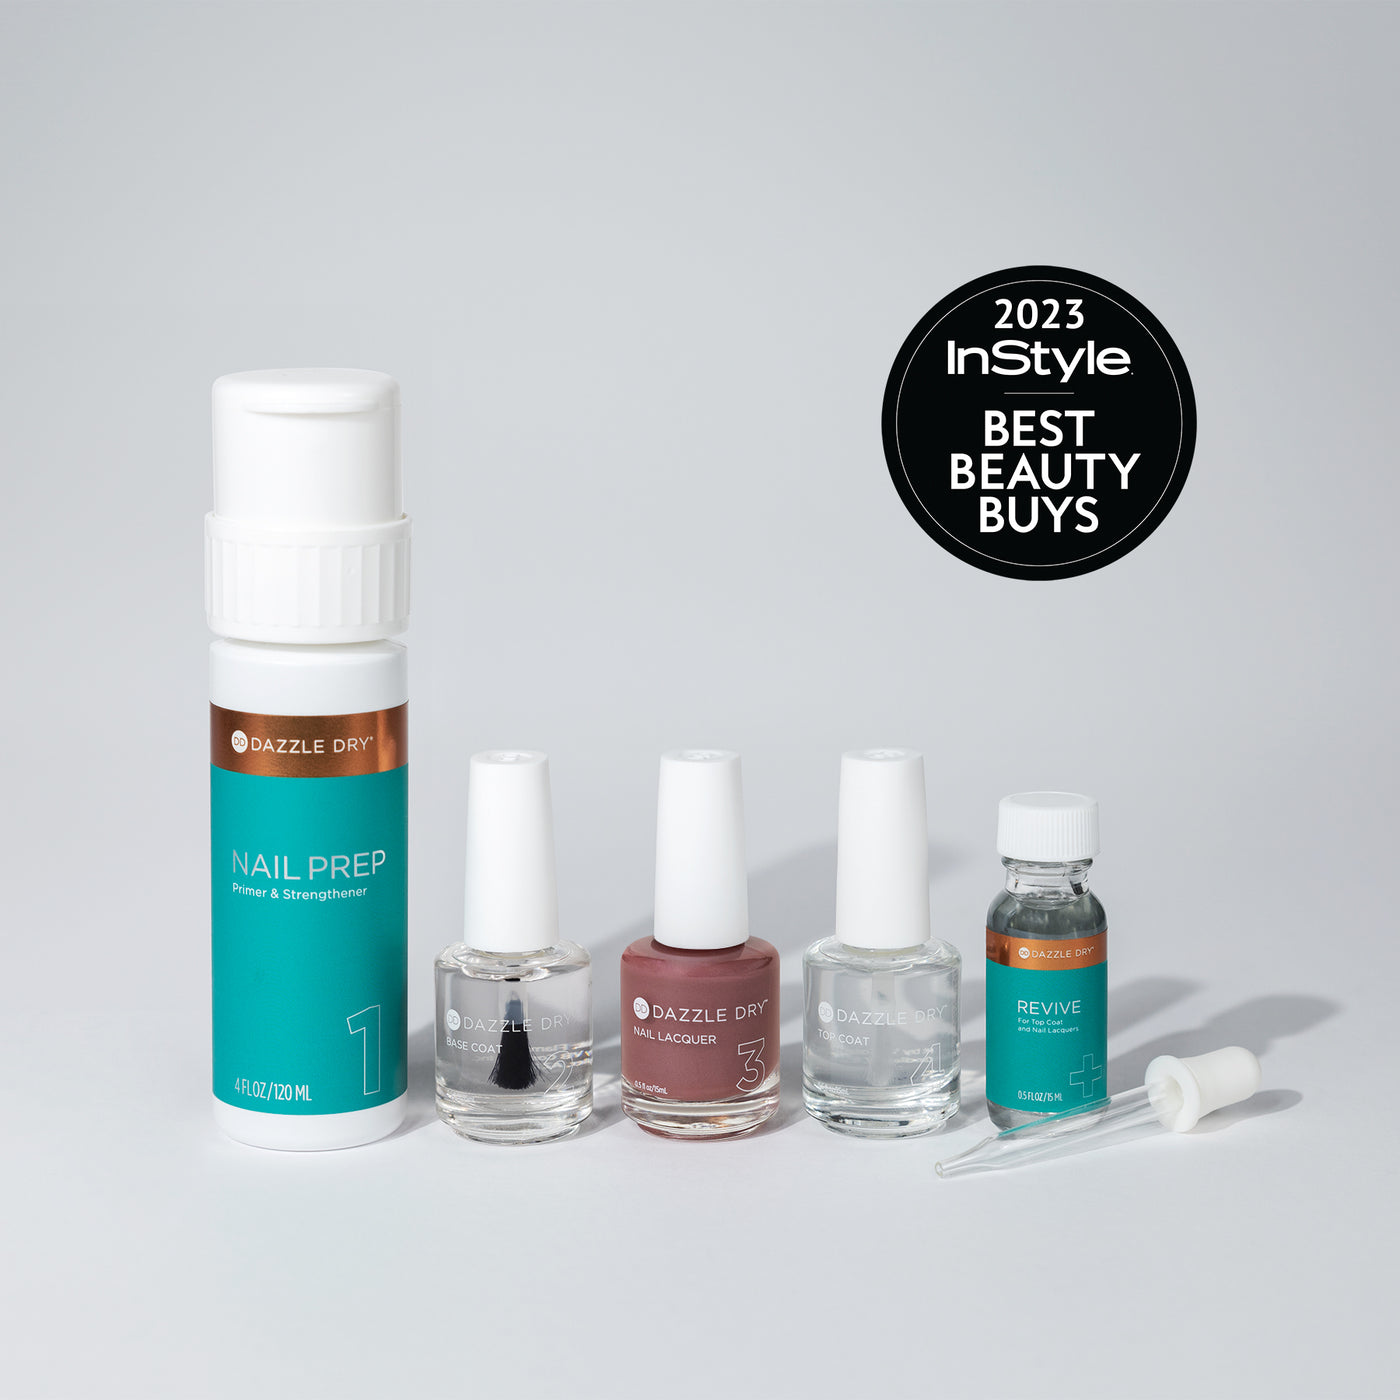 Day Dreaming System Kit - Dazzle Dry nail lacquer